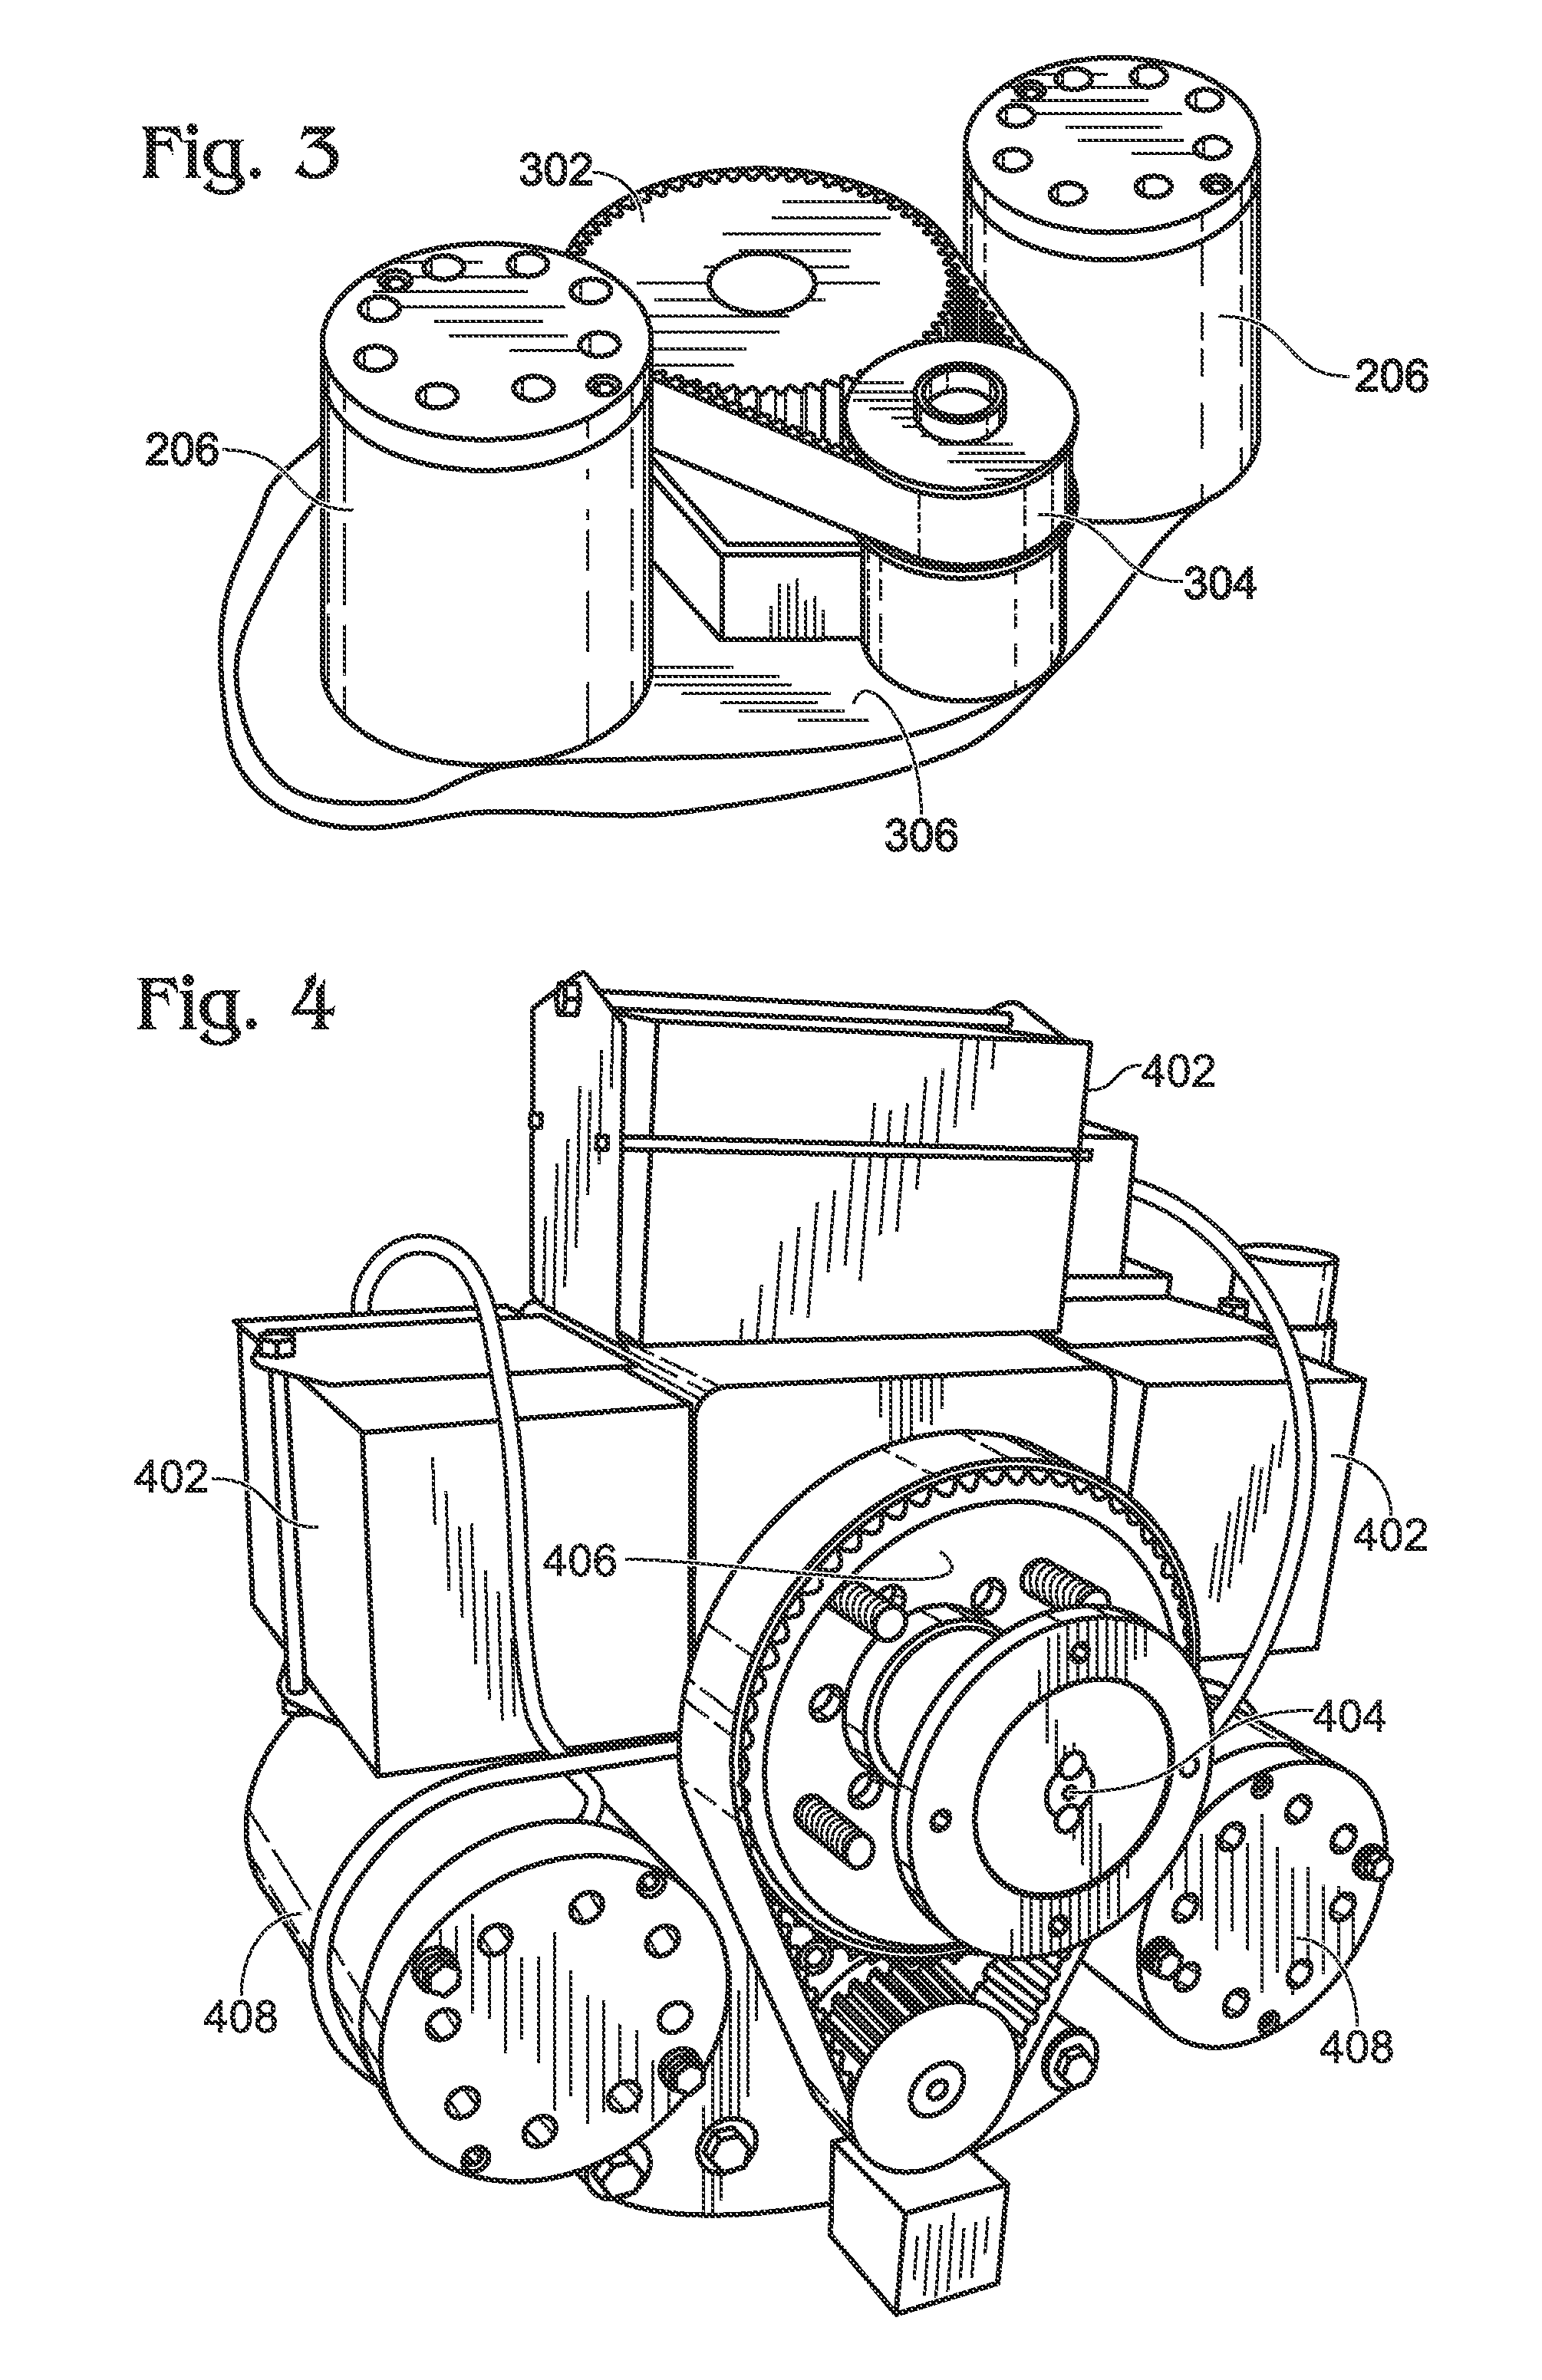 Electric-powered self-balancing unicycle with steering linkage between handlebars and wheel forks